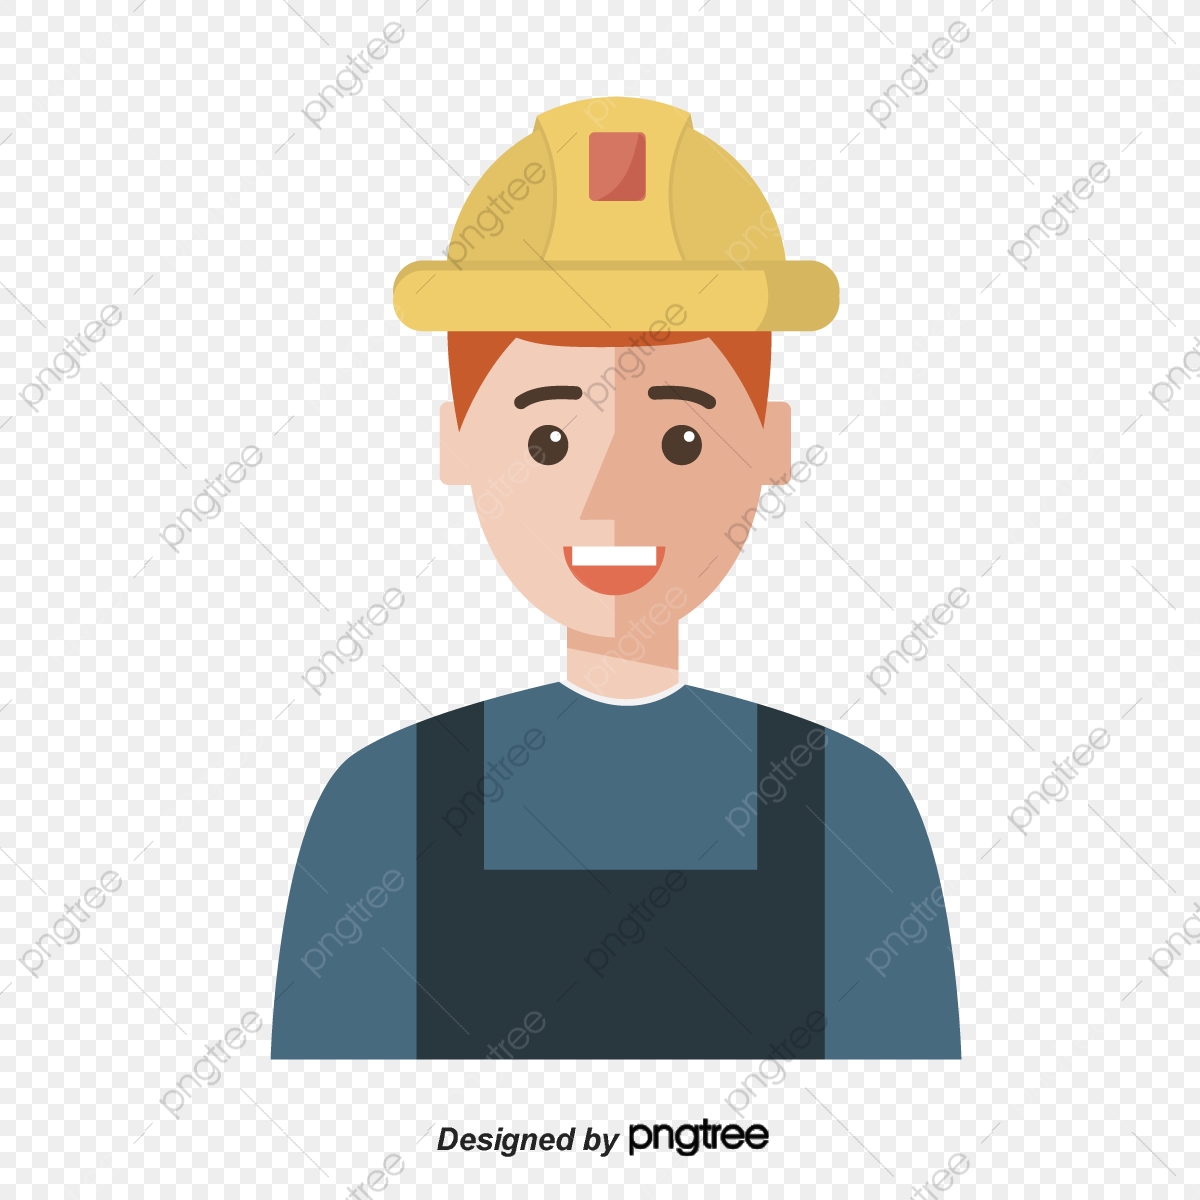 professional clipart blue collar worker